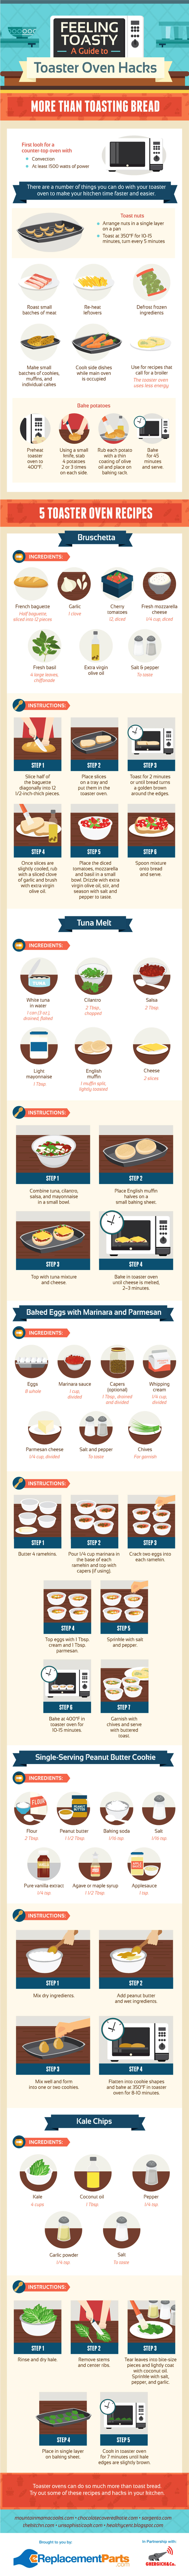 Toasty Guide Toaster Oven Hacks - Cooking Infographic